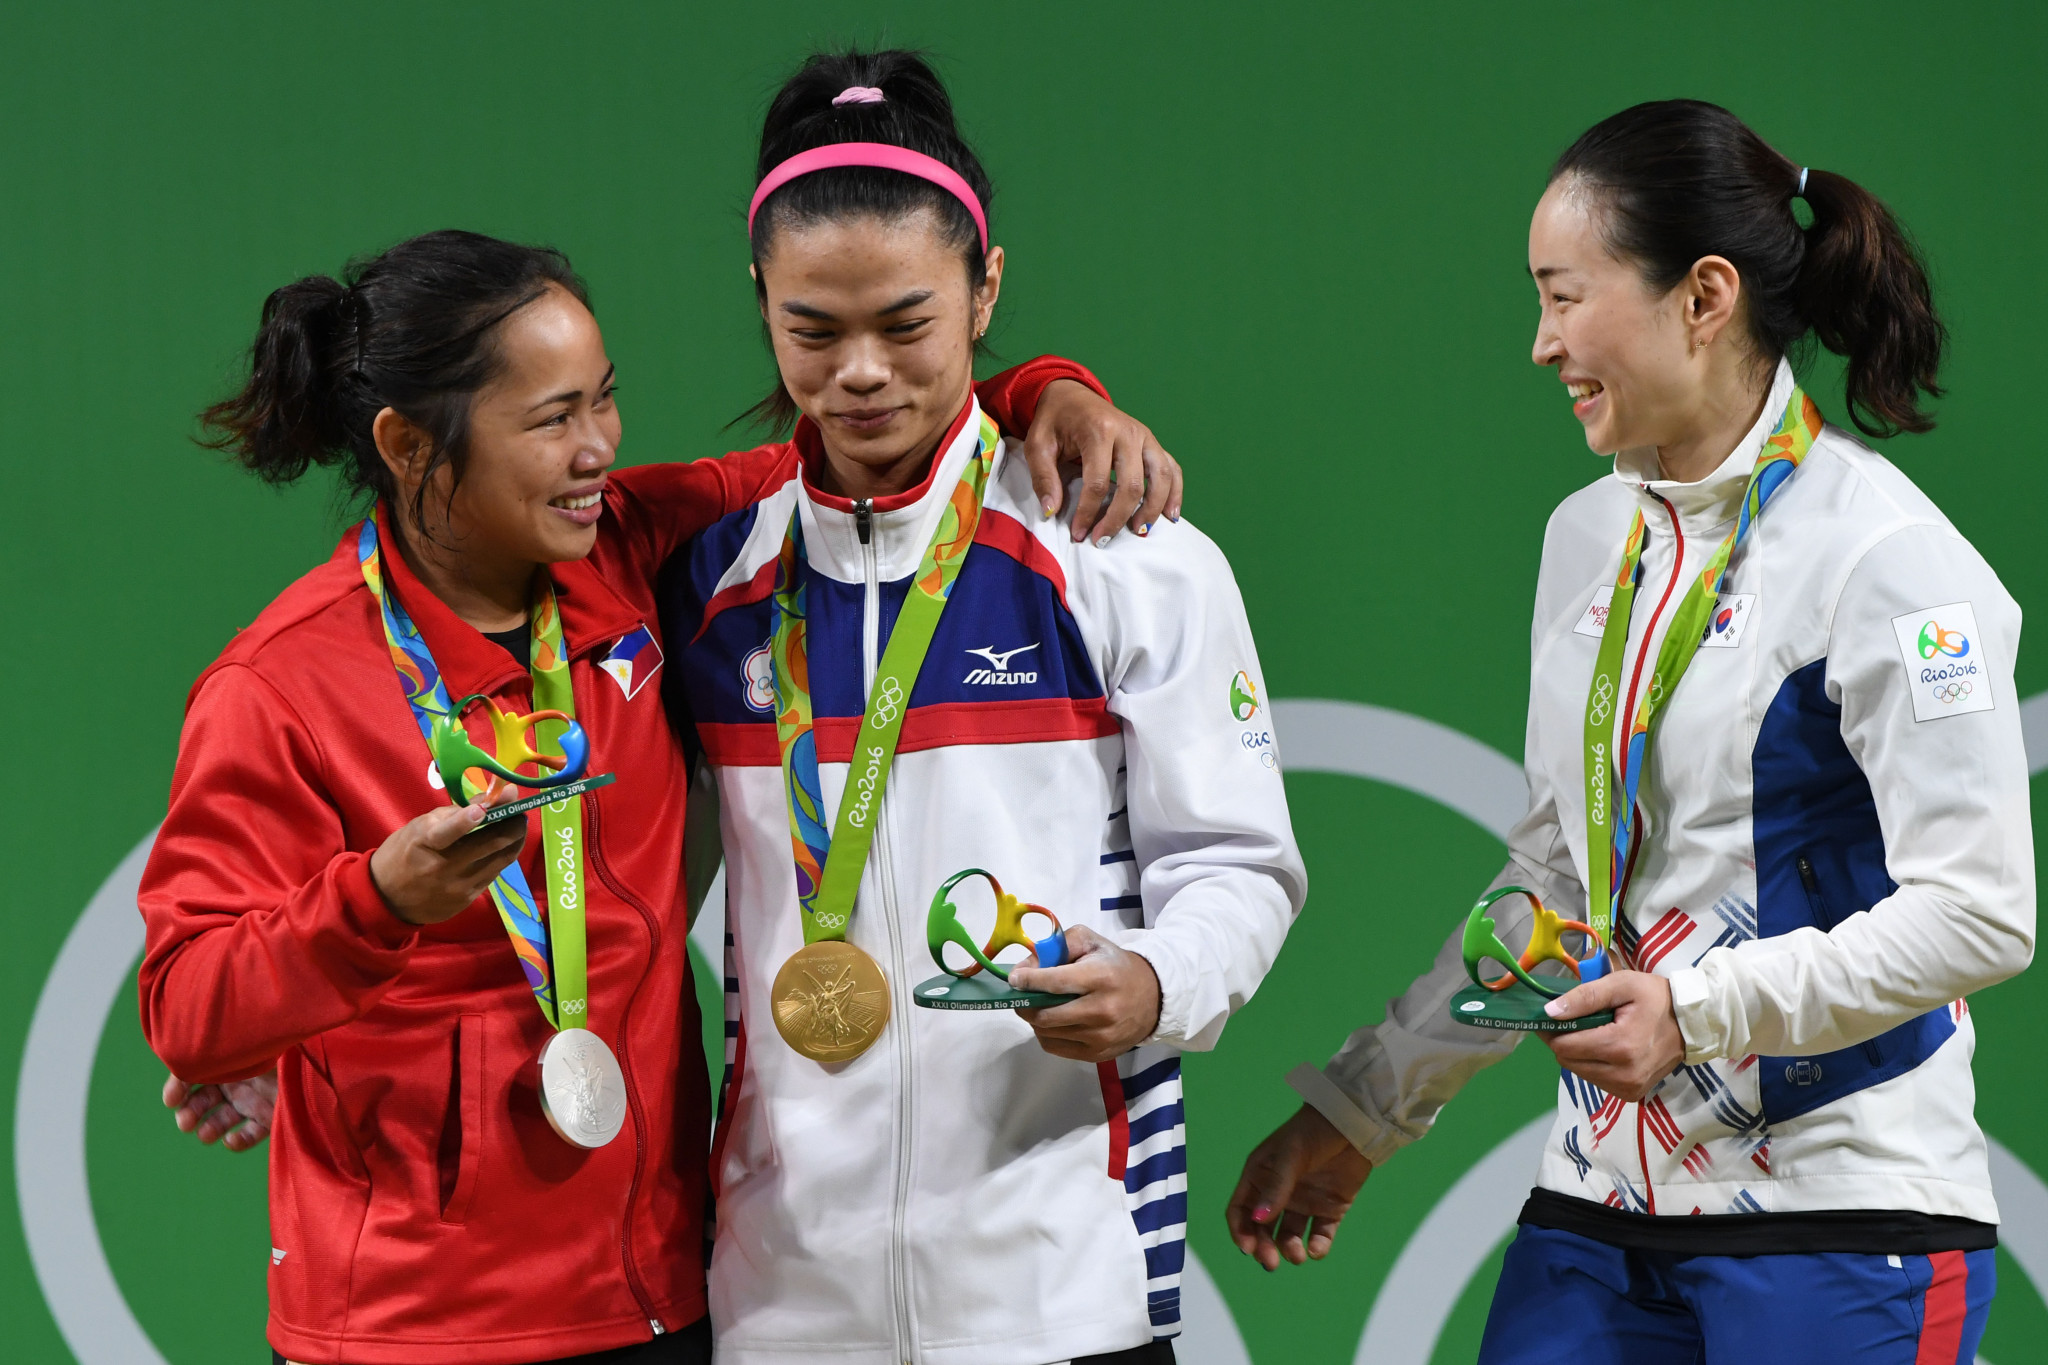 Hsu Shu-ching, centre, became the fifth Chinese Taipei athlete to secure an Olympic gold medal when she triumphed in weightlifting at Rio 2016 ©Getty Images